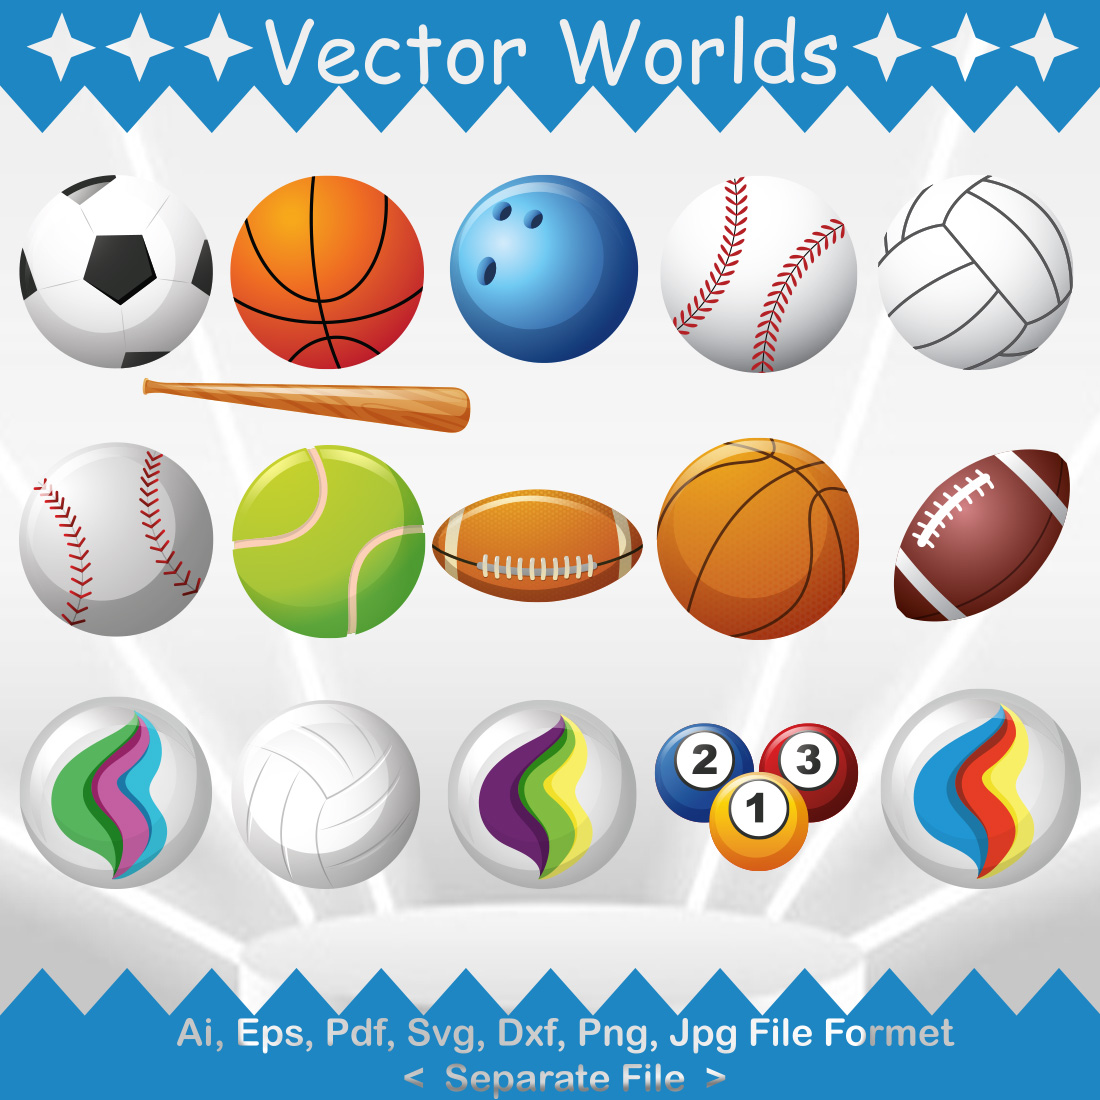 Pack of unique vector images of balls.